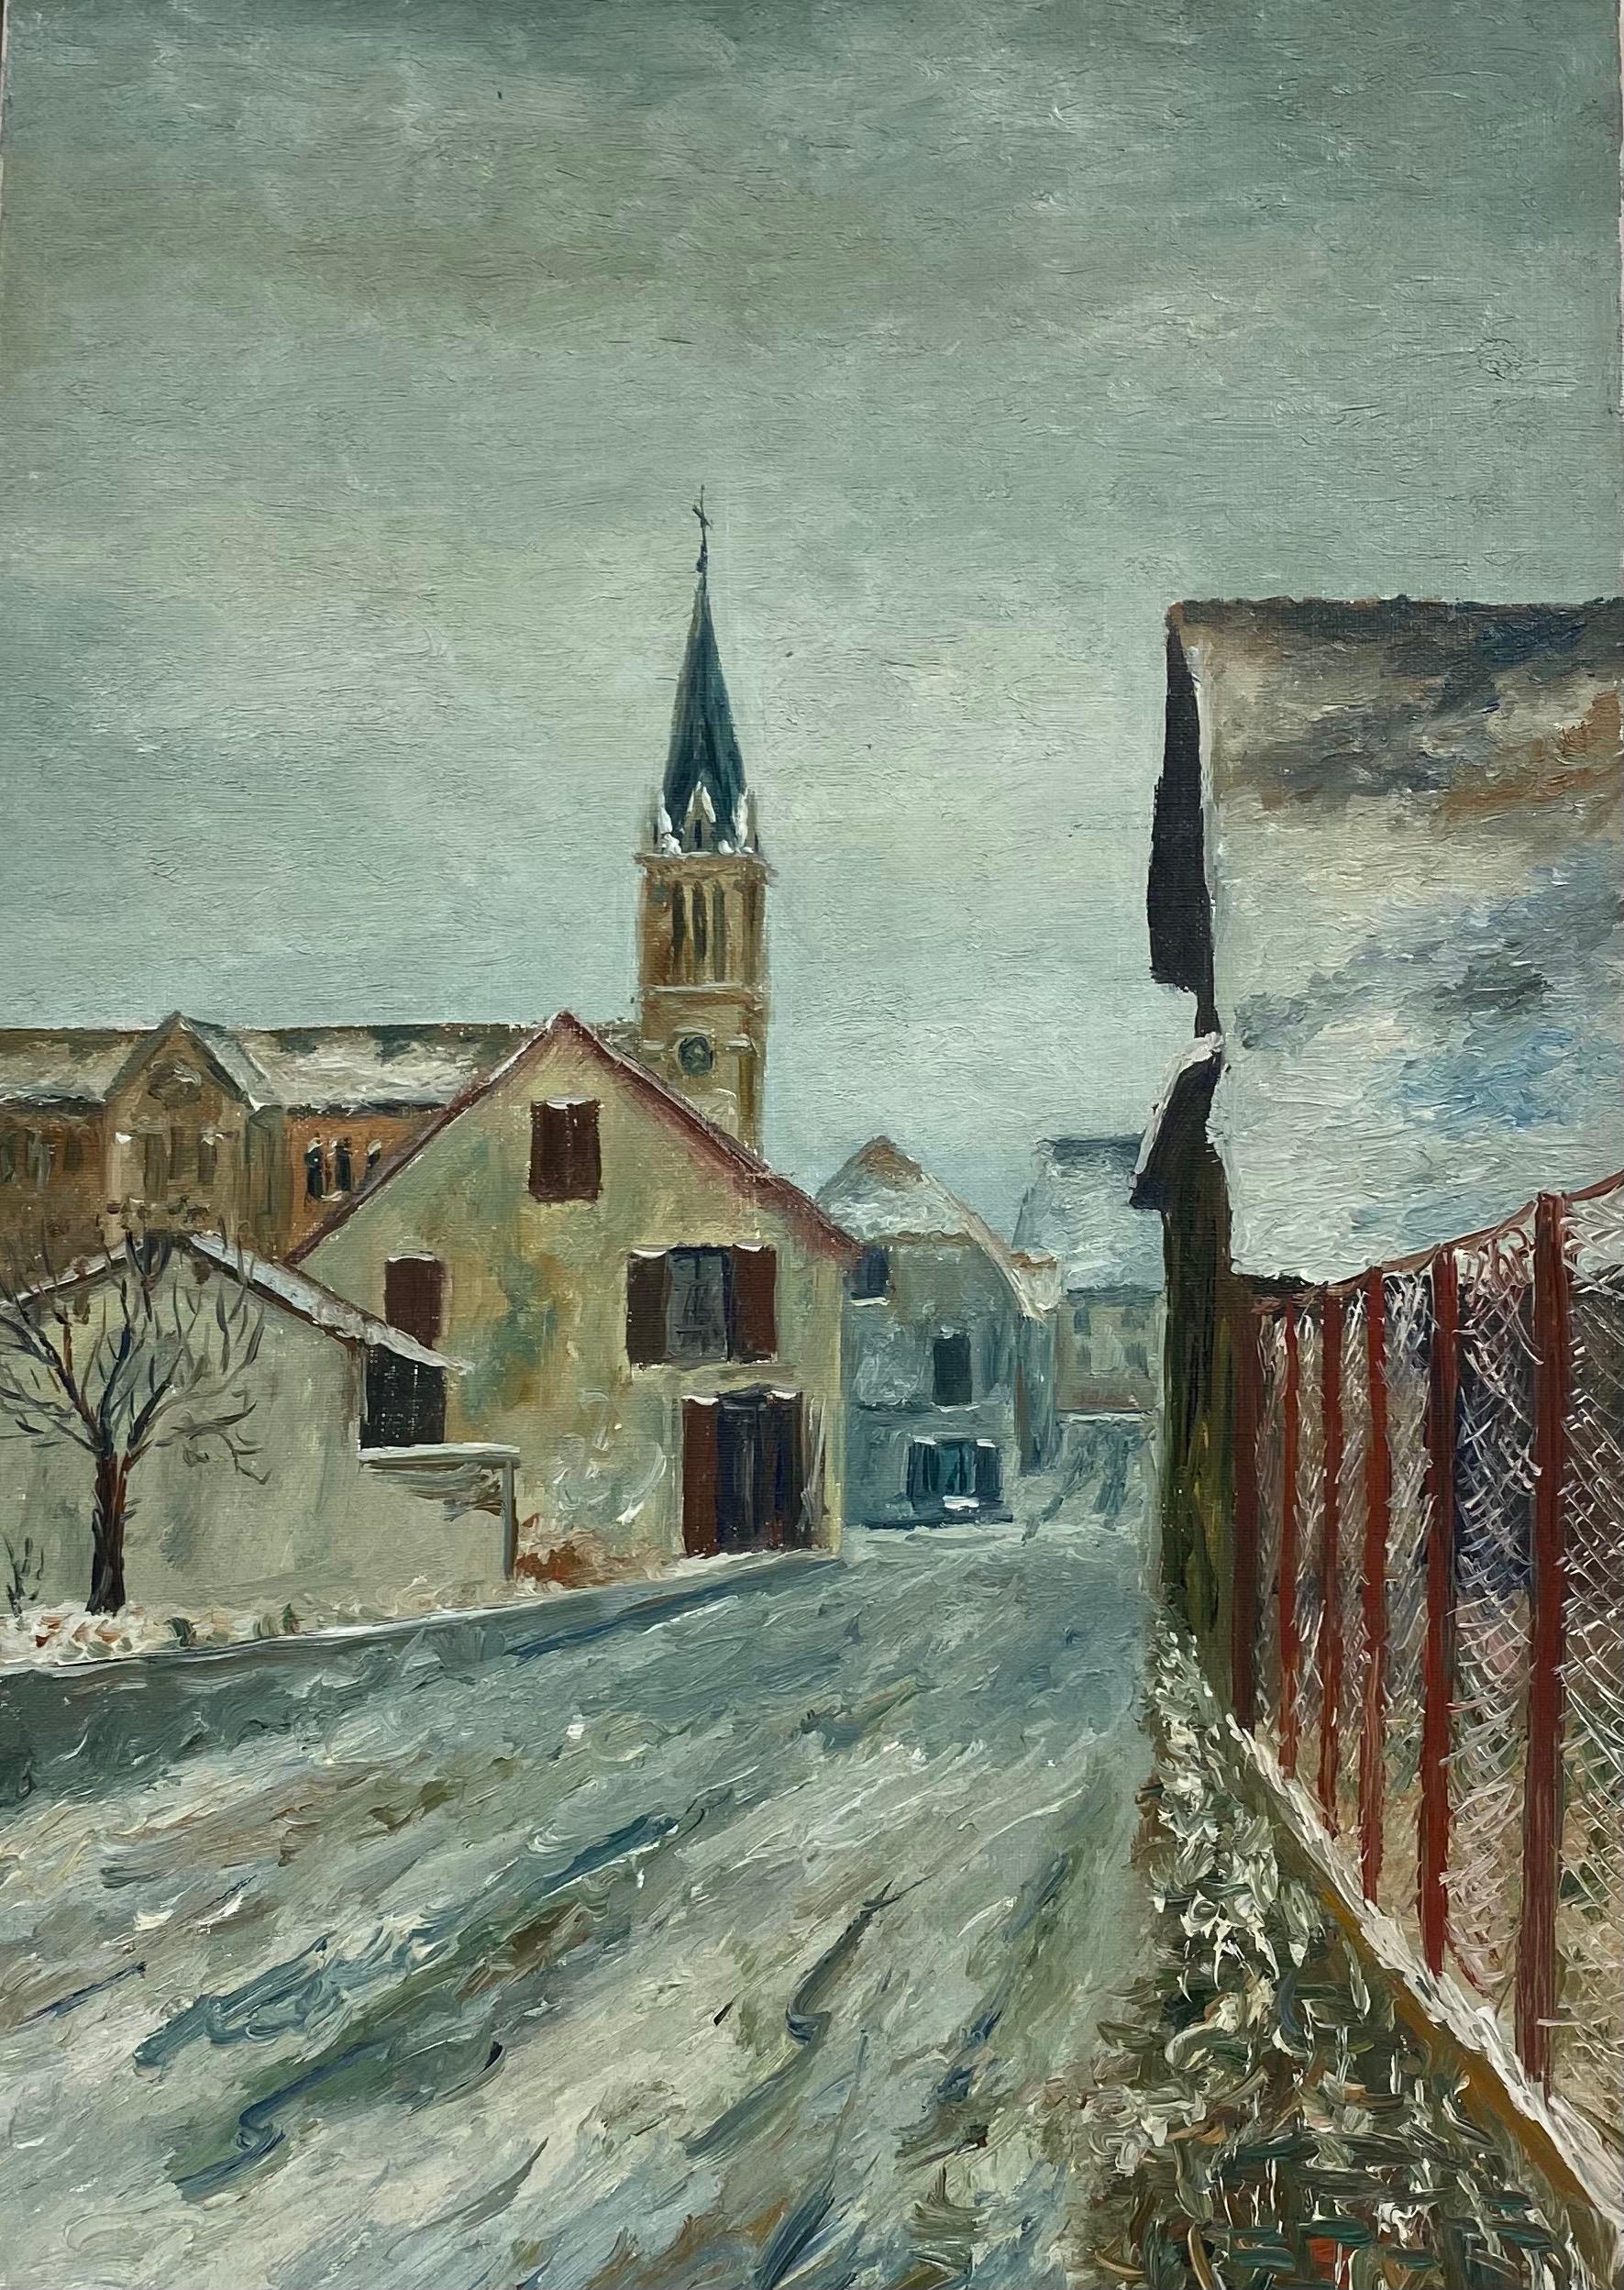 Fernand Audet Landscape Painting - Vintage French Oil Painting Village Scene in Winters Snow